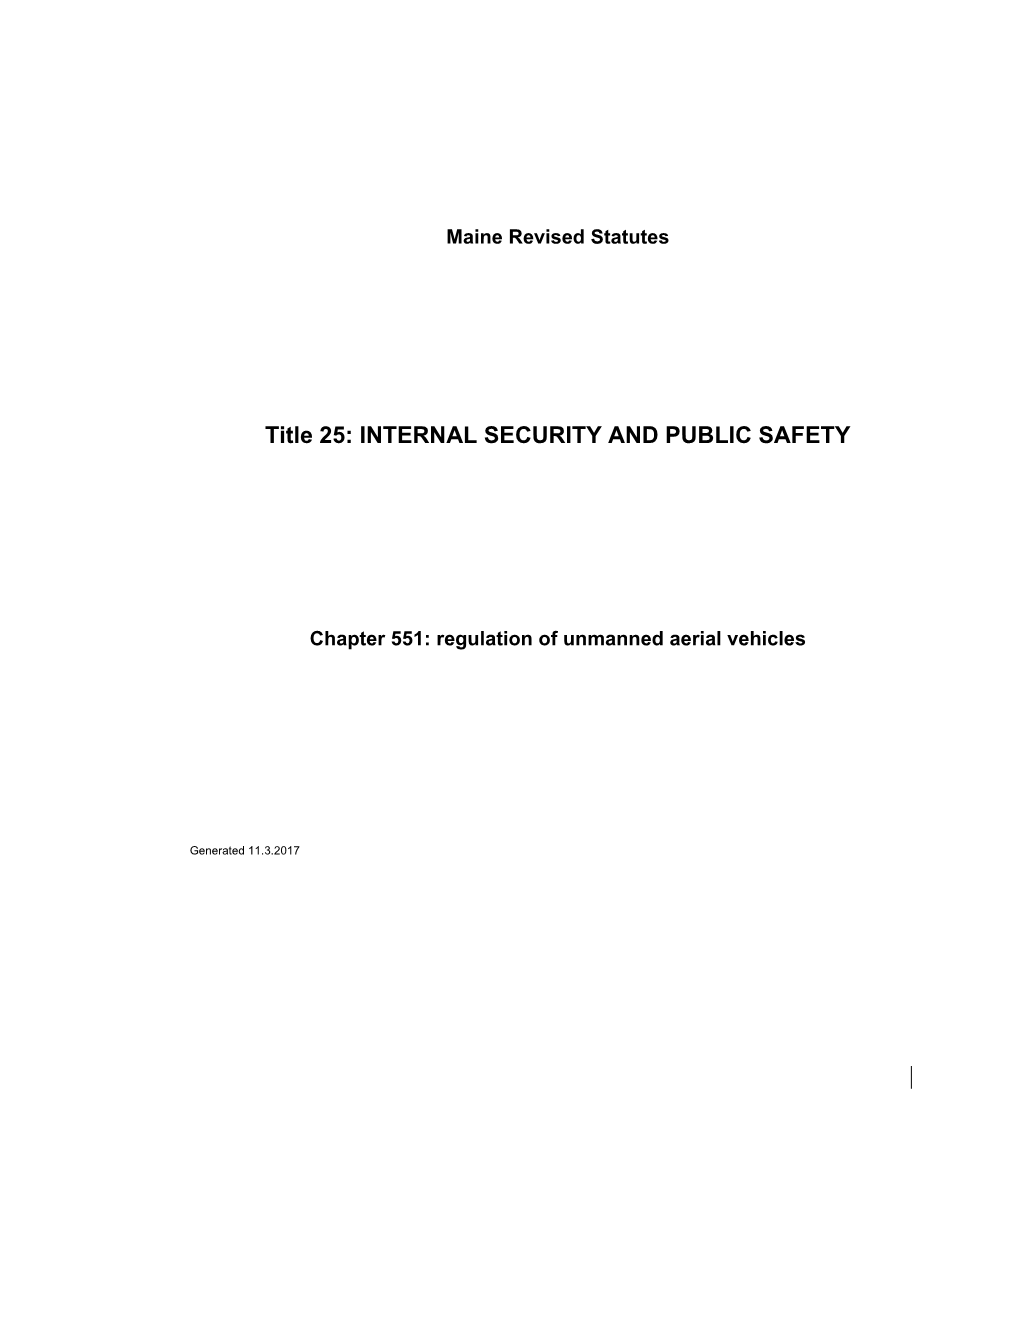 MRS Title 25 4501. REGULATION of UNMANNED AERIAL VEHICLES